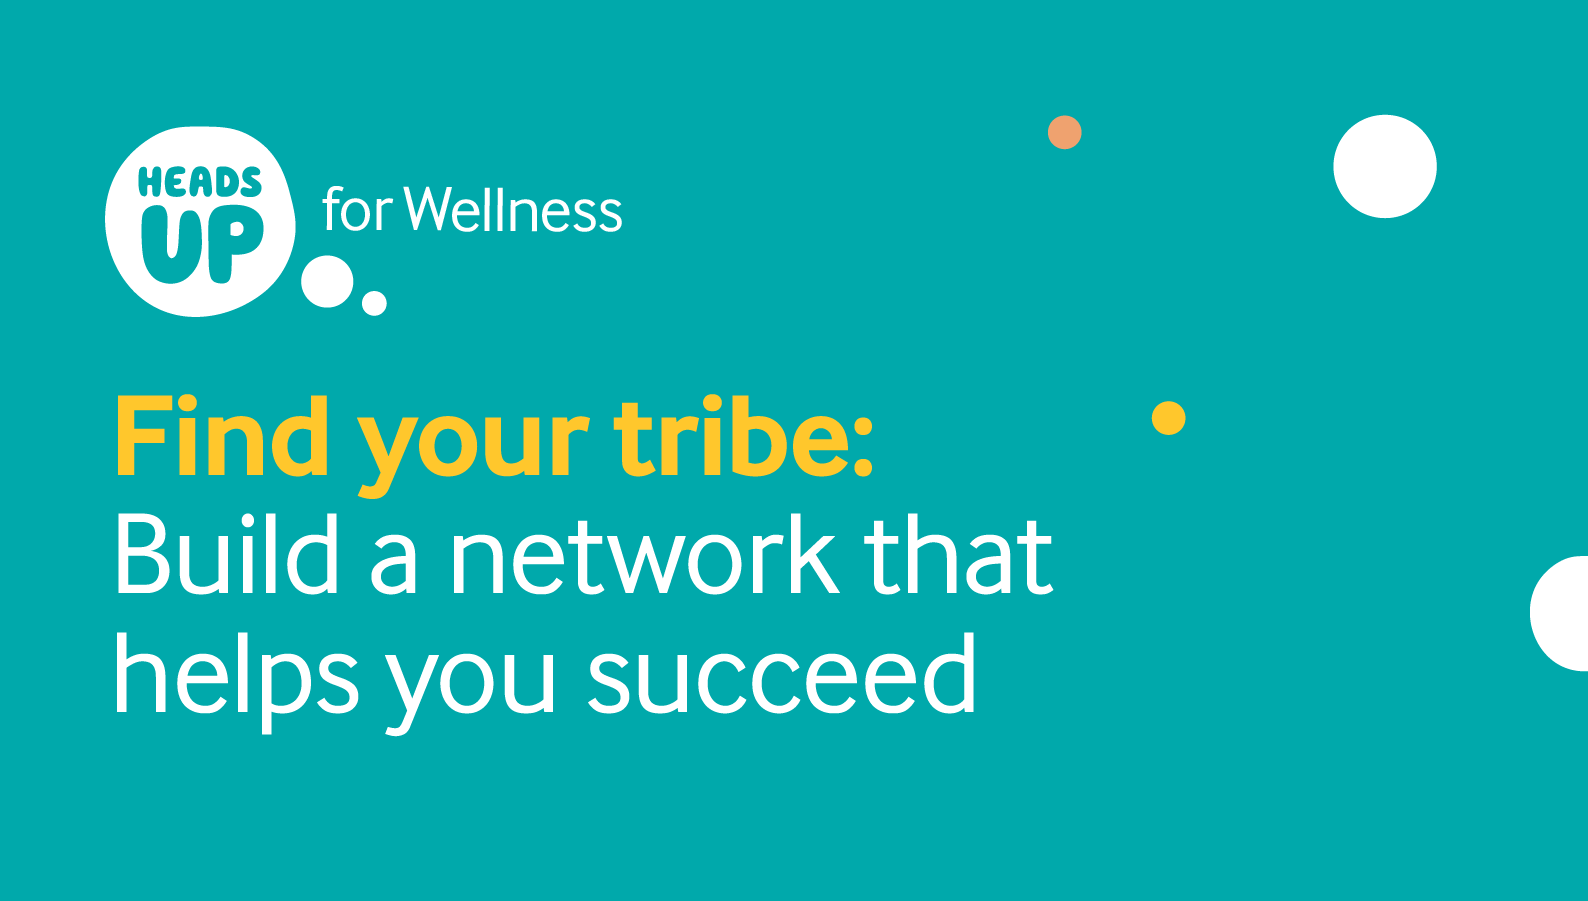 Heads up for wellness: Find your tribe